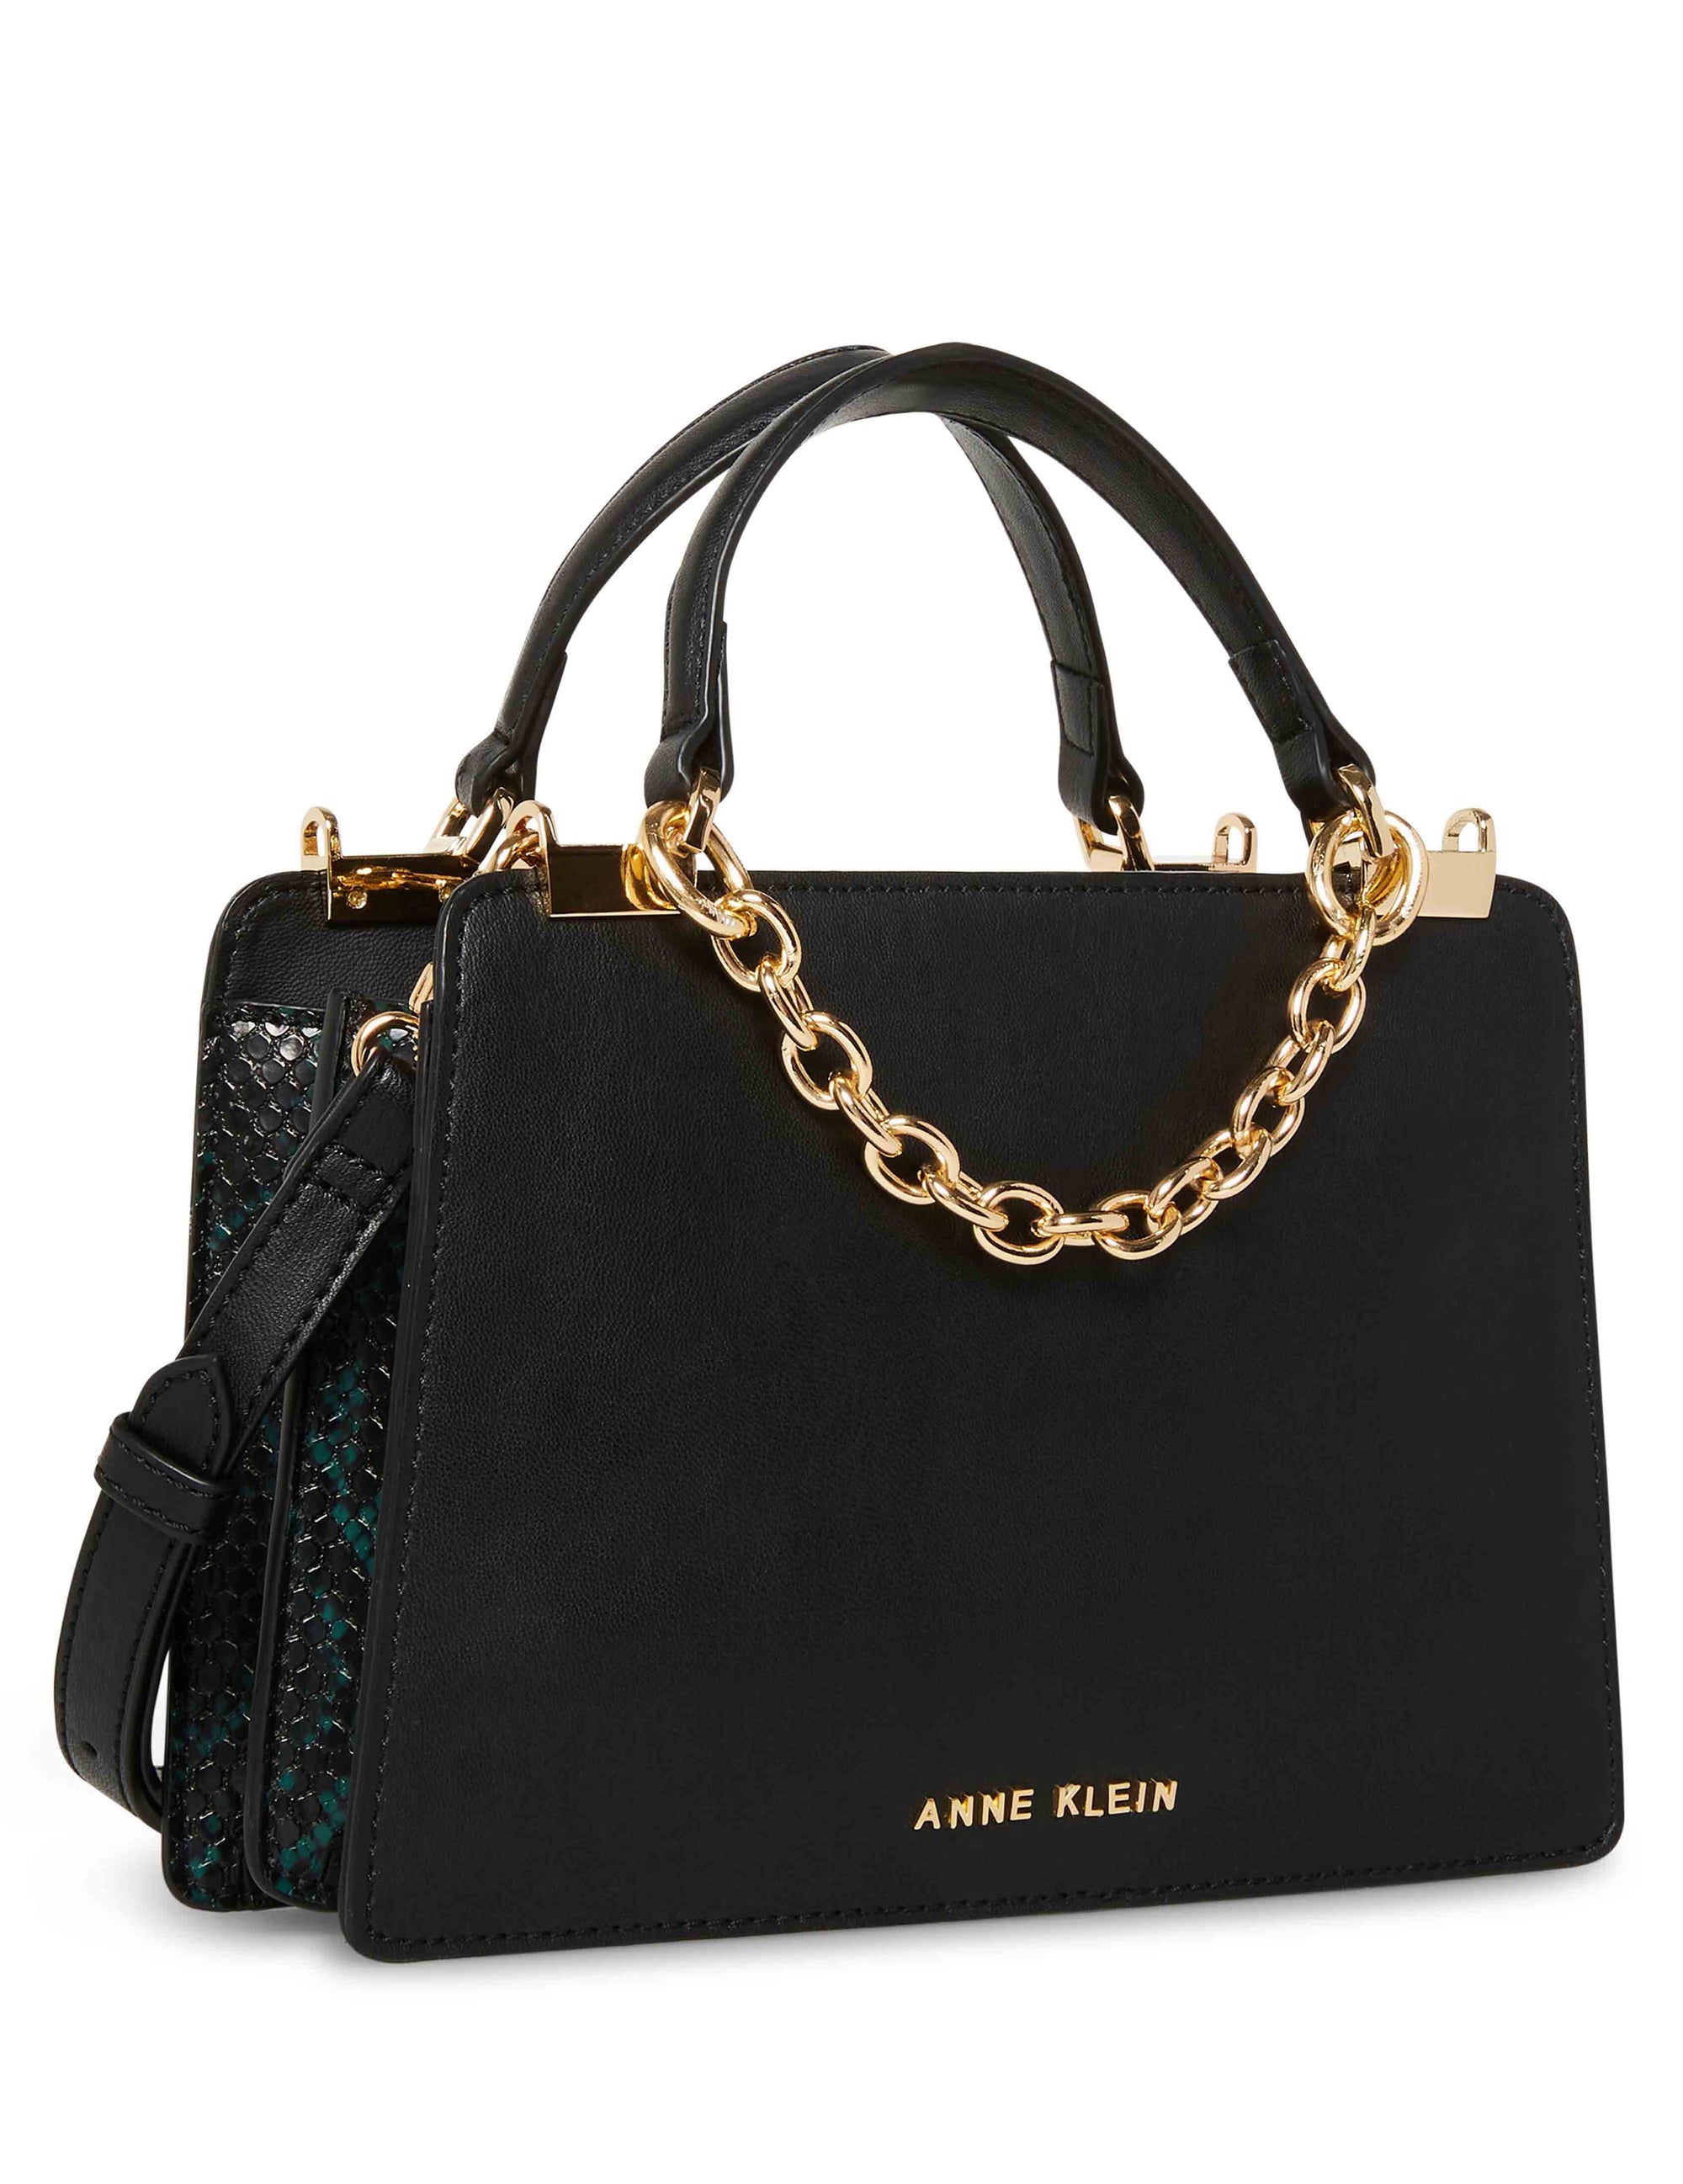 Anne Klein Black/Evergreen Multi Mini Convertible Snake Trimmed Satchel With Swag Chain